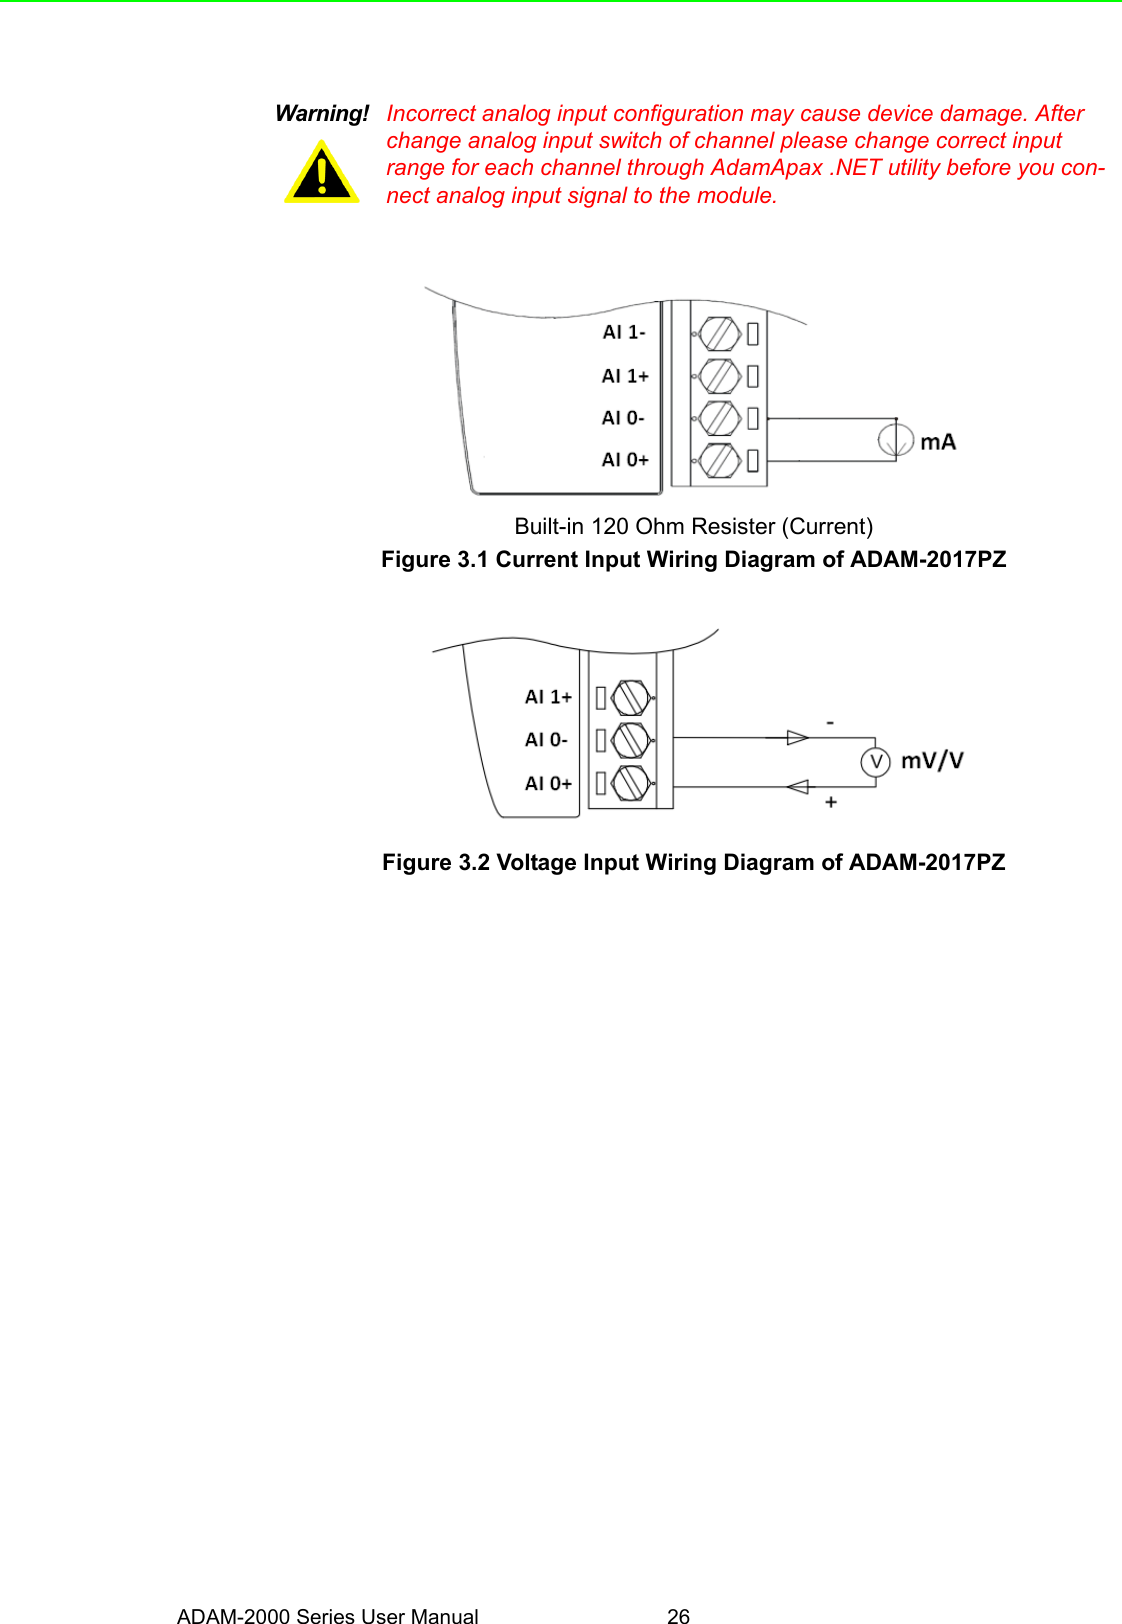 ADAM-2000 Series User Manual 26Built-in 120 Ohm Resister (Current)Figure 3.1 Current Input Wiring Diagram of ADAM-2017PZFigure 3.2 Voltage Input Wiring Diagram of ADAM-2017PZWarning! Incorrect analog input configuration may cause device damage. After change analog input switch of channel please change correct input range for each channel through AdamApax .NET utility before you con-nect analog input signal to the module.